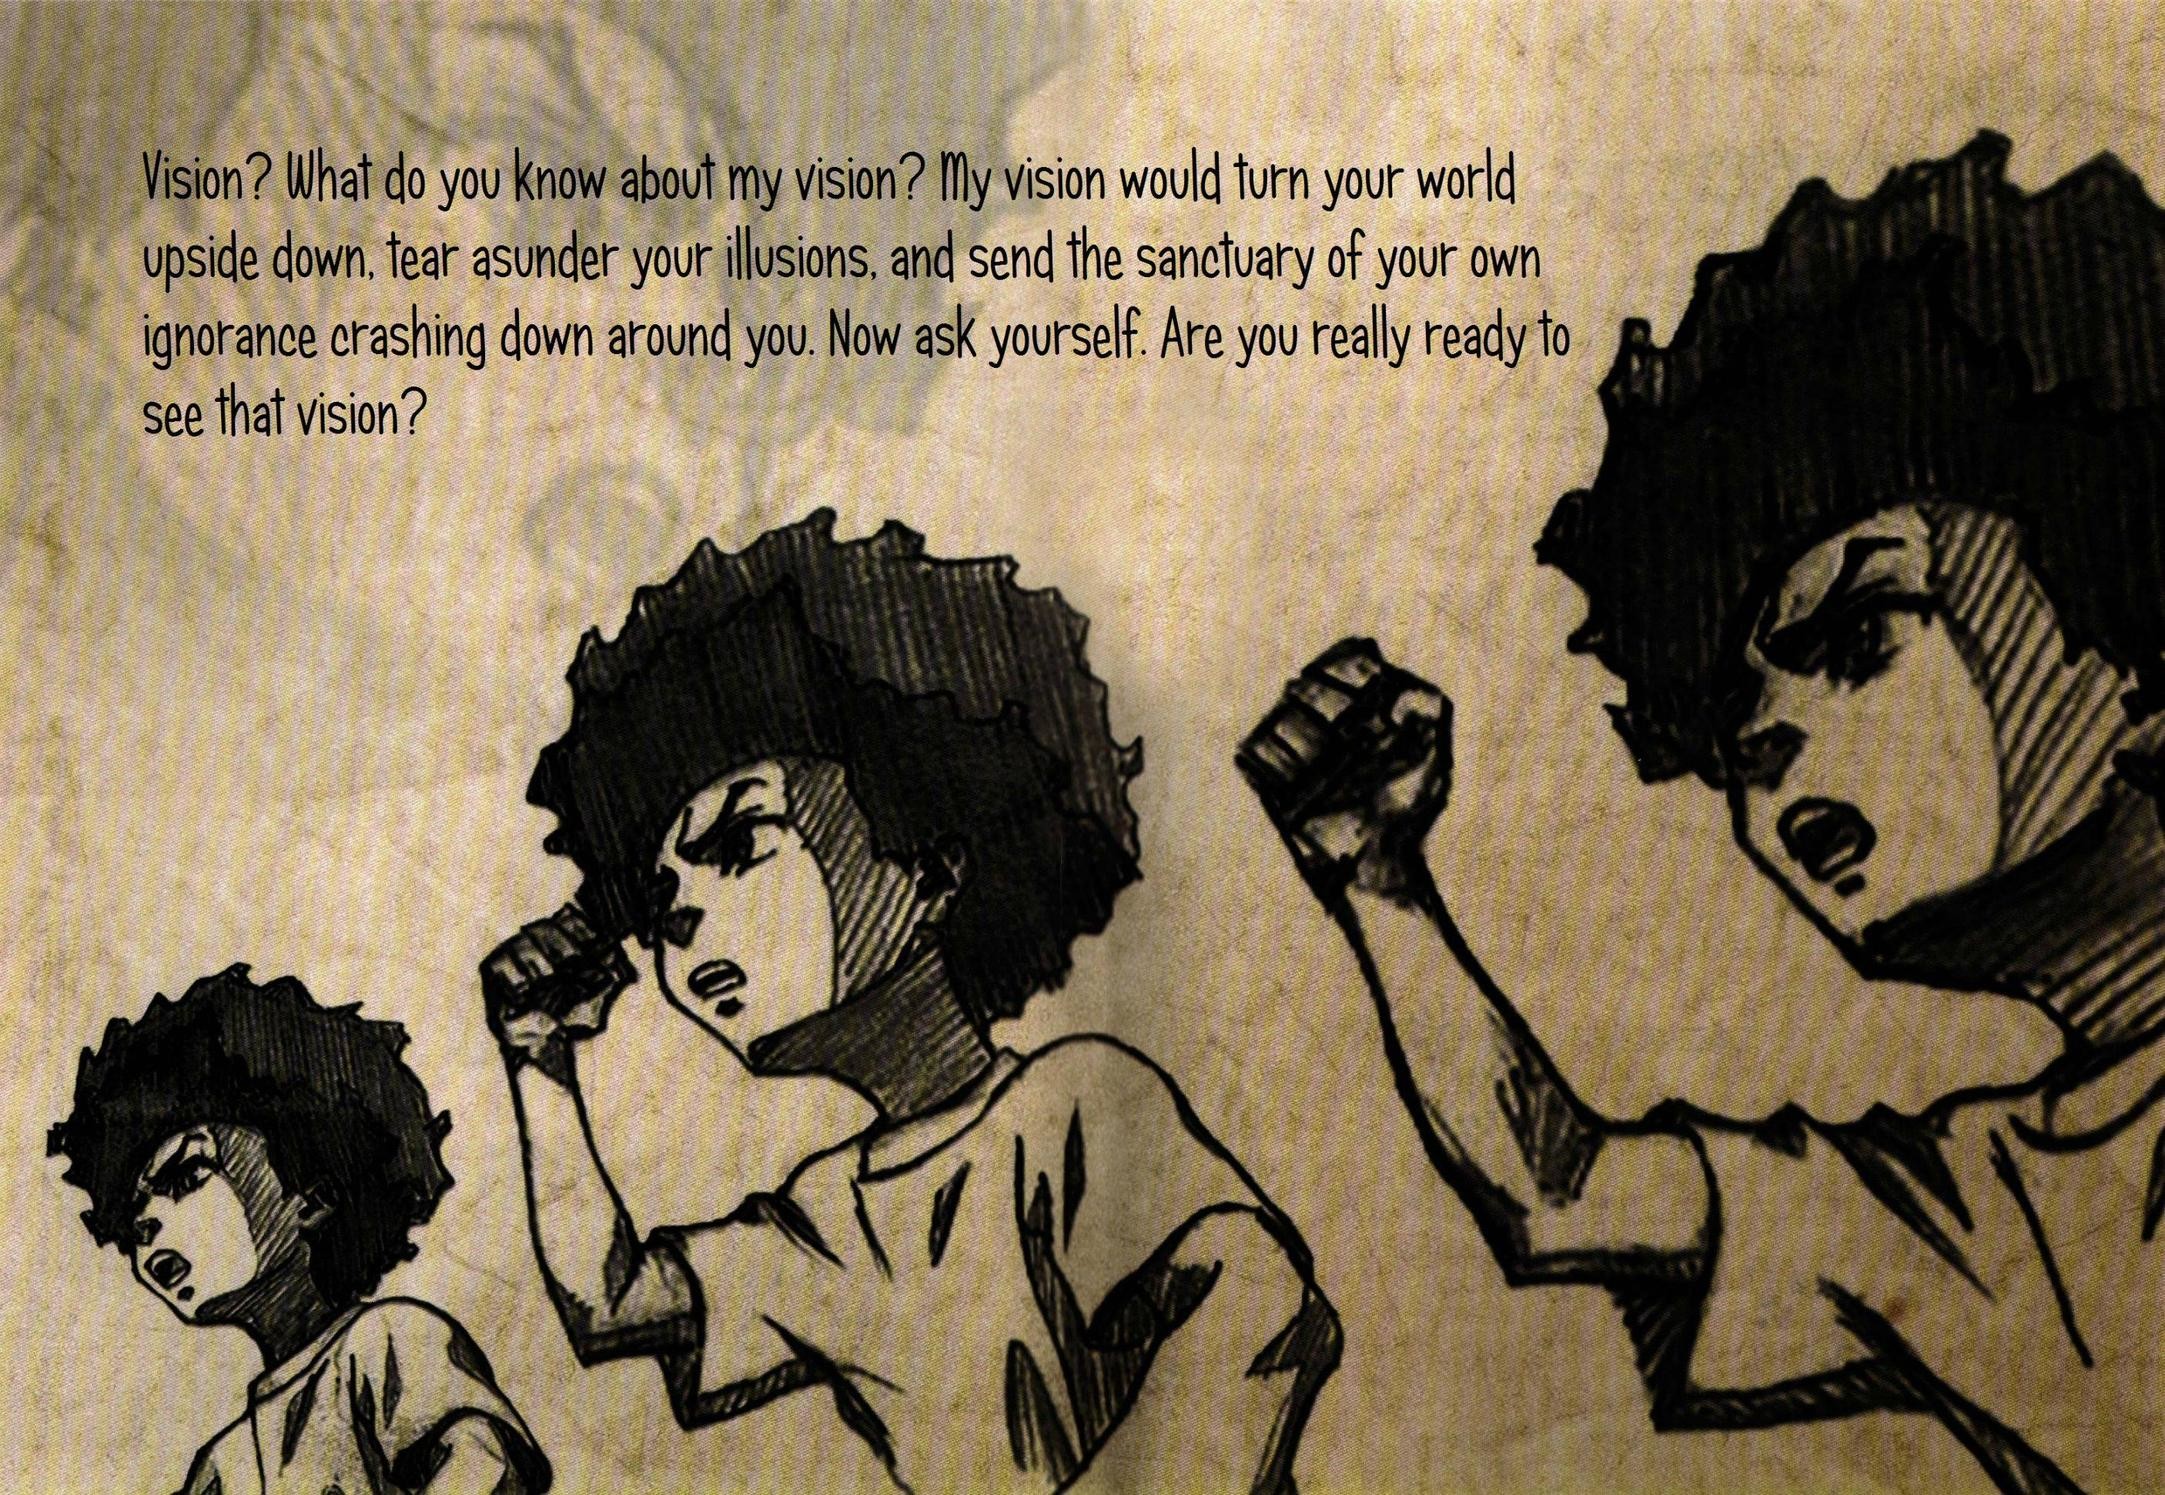 2165x1495 17 Best images about The Boondocks on Pinterest | deviantART, Blog and  Cartoon